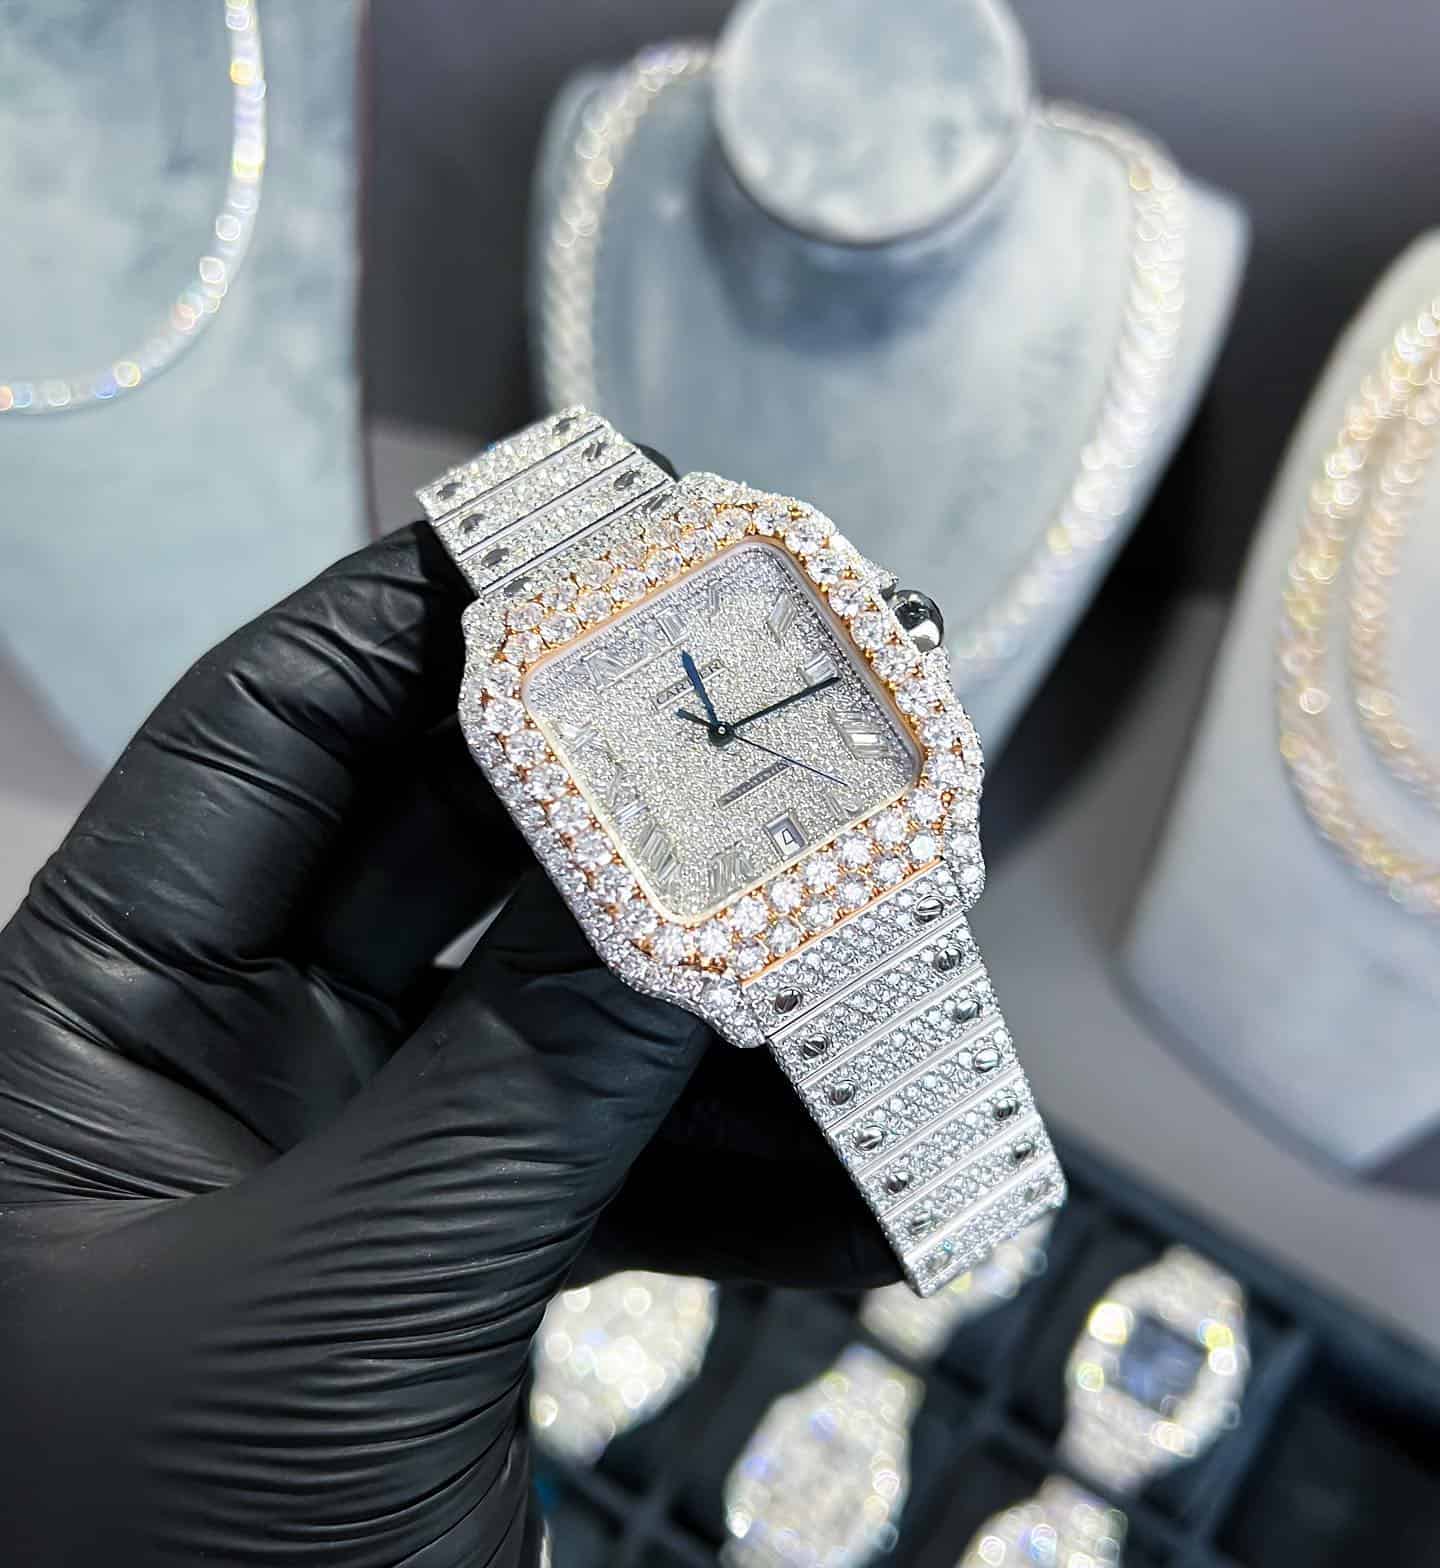 Bigger diamonds used to customize a Cartier Watch